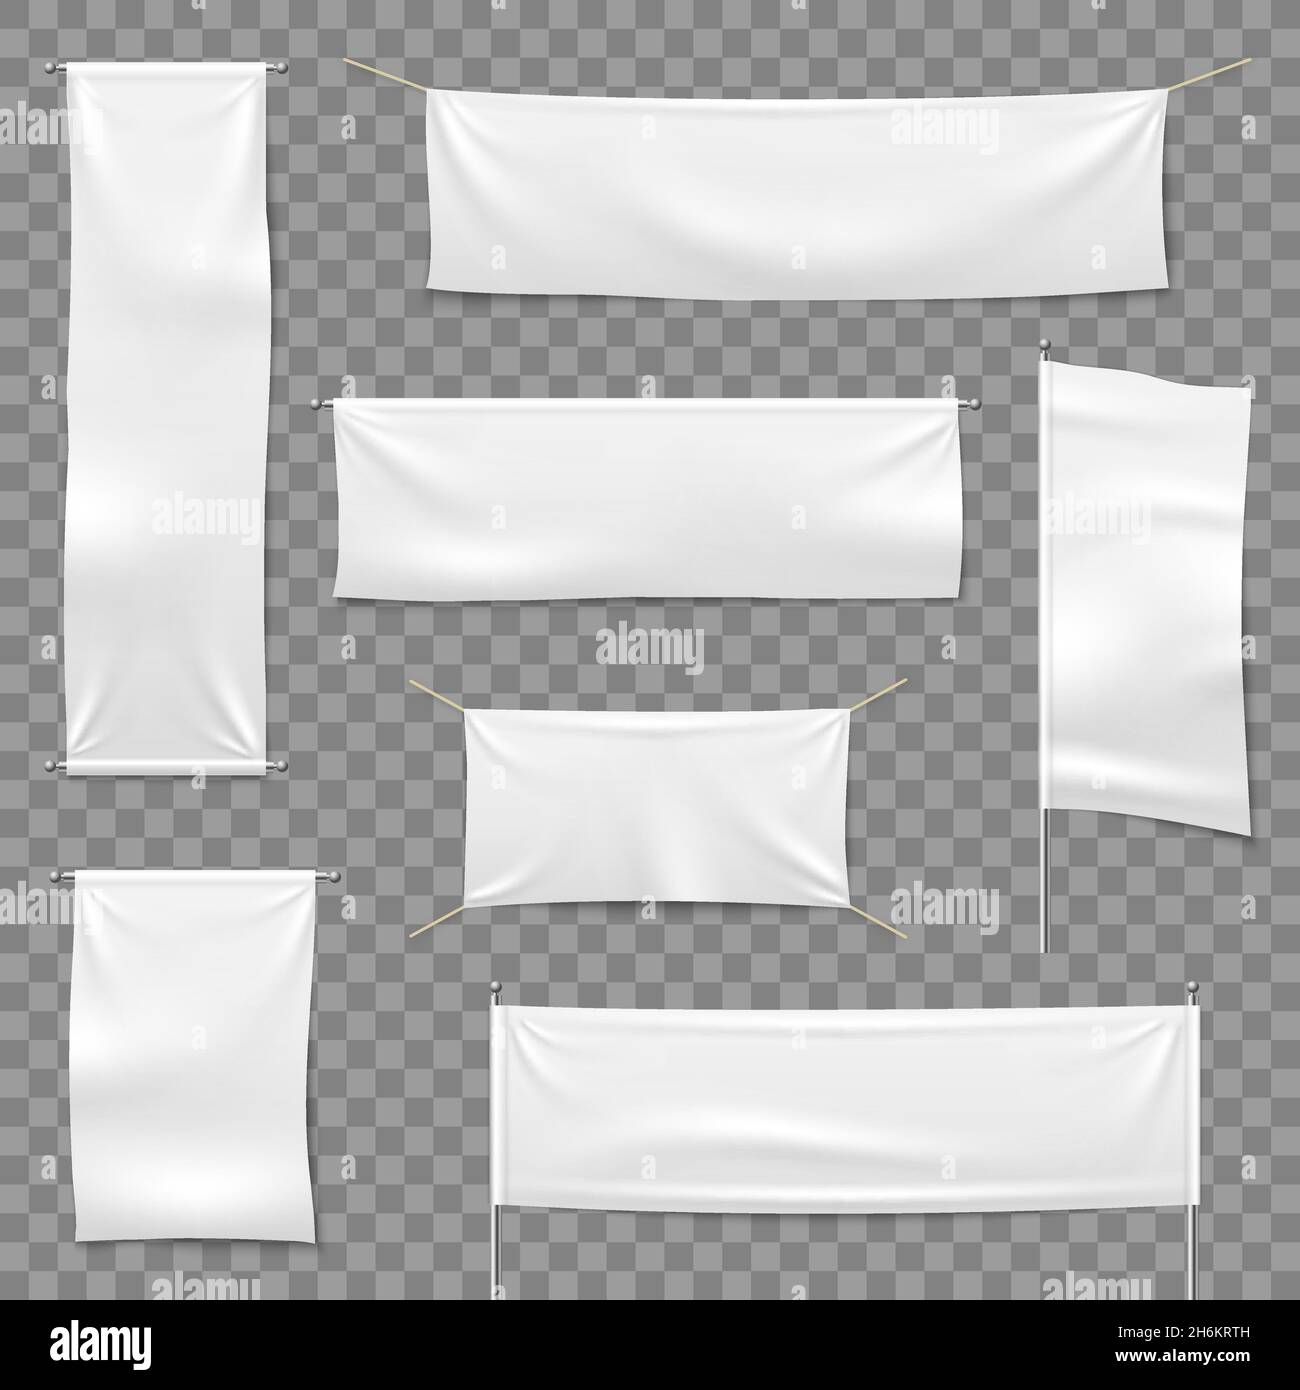 Textile advertising banners. Flags and hanging banner, blank fabric white horizontal cloth sign, textile ribbons vector Stock Vector